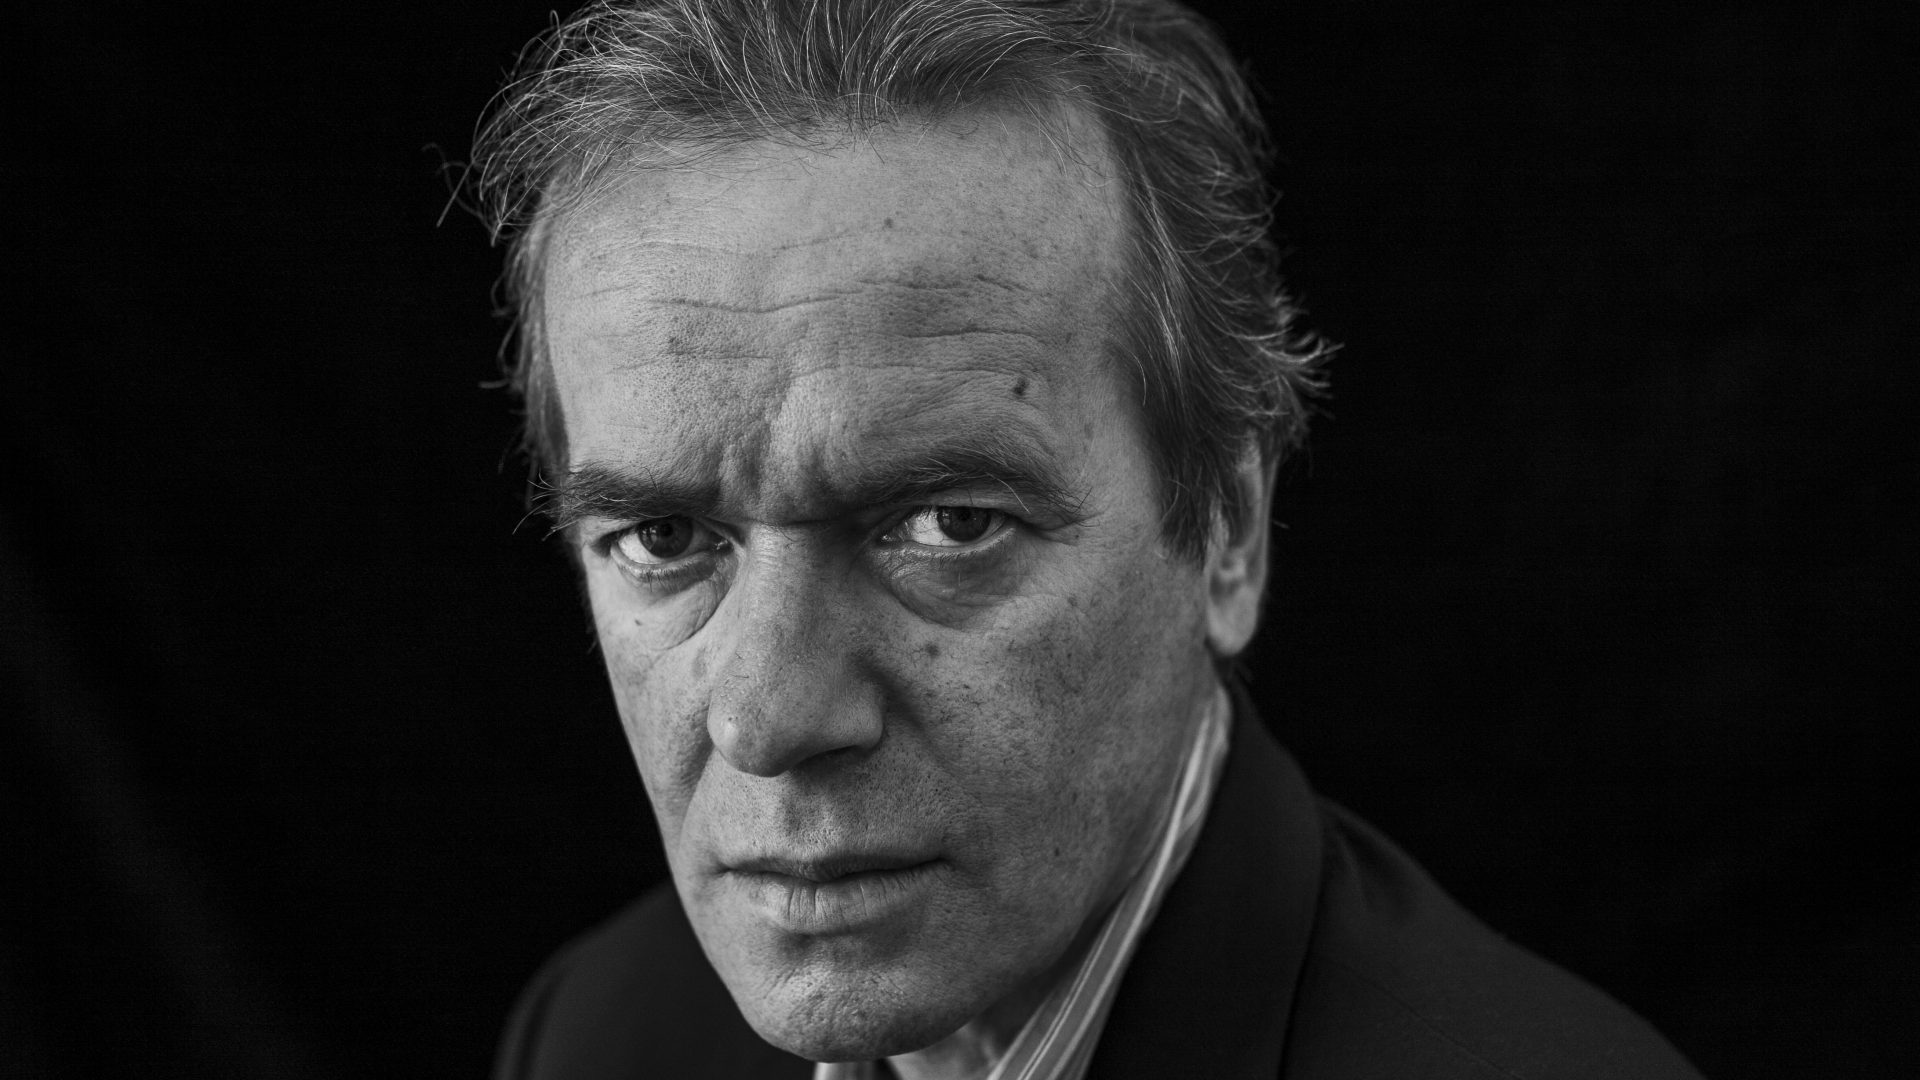 Author Martin Amis in 2007. He died on May 19, aged 73. Photo: David Levenson/Getty Images